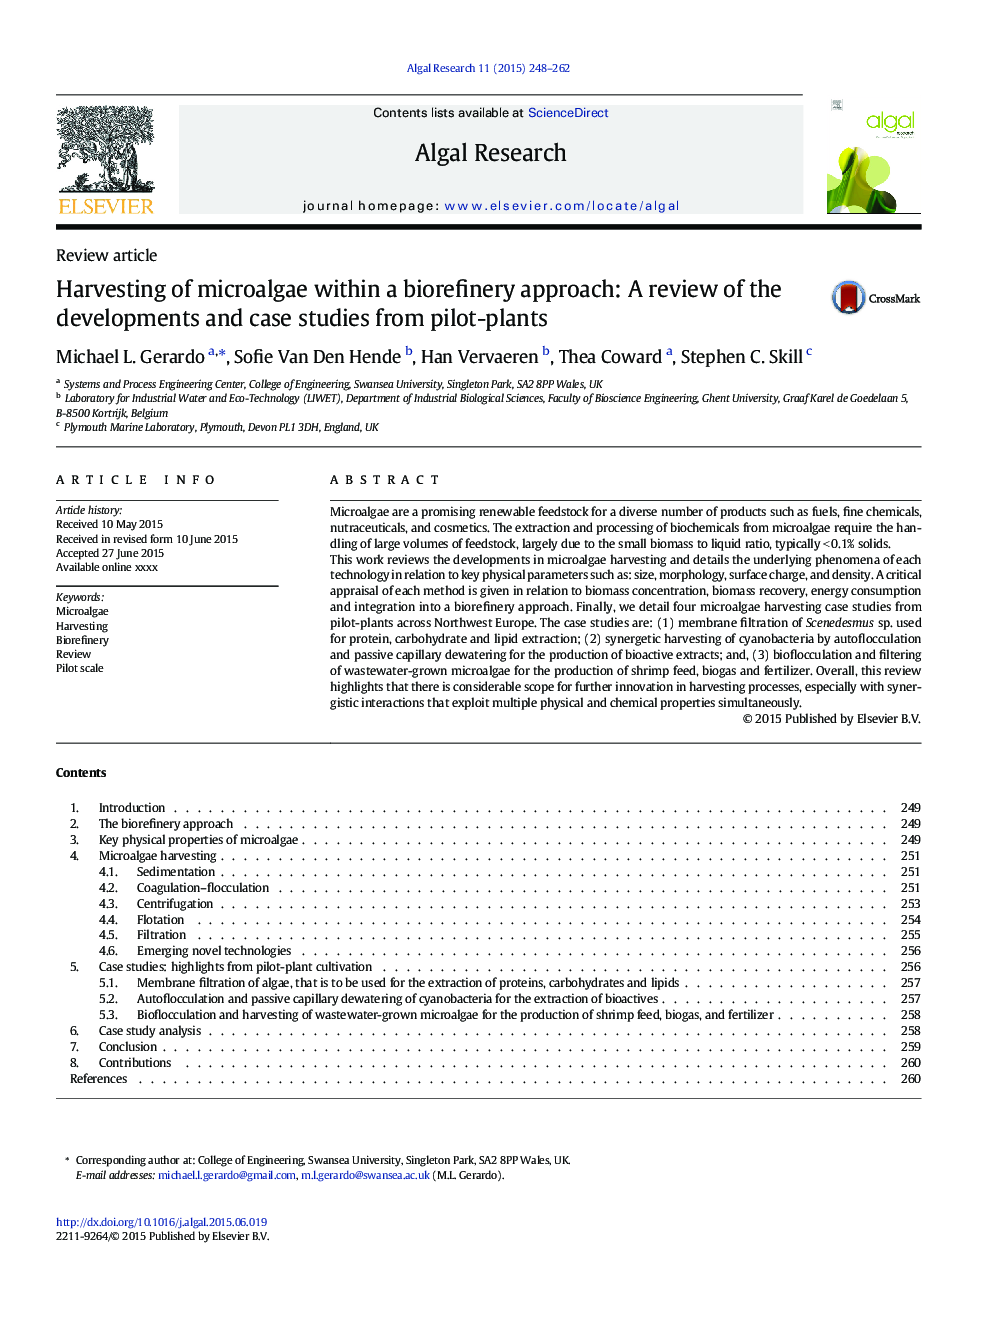 Harvesting of microalgae within a biorefinery approach: A review of the developments and case studies from pilot-plants